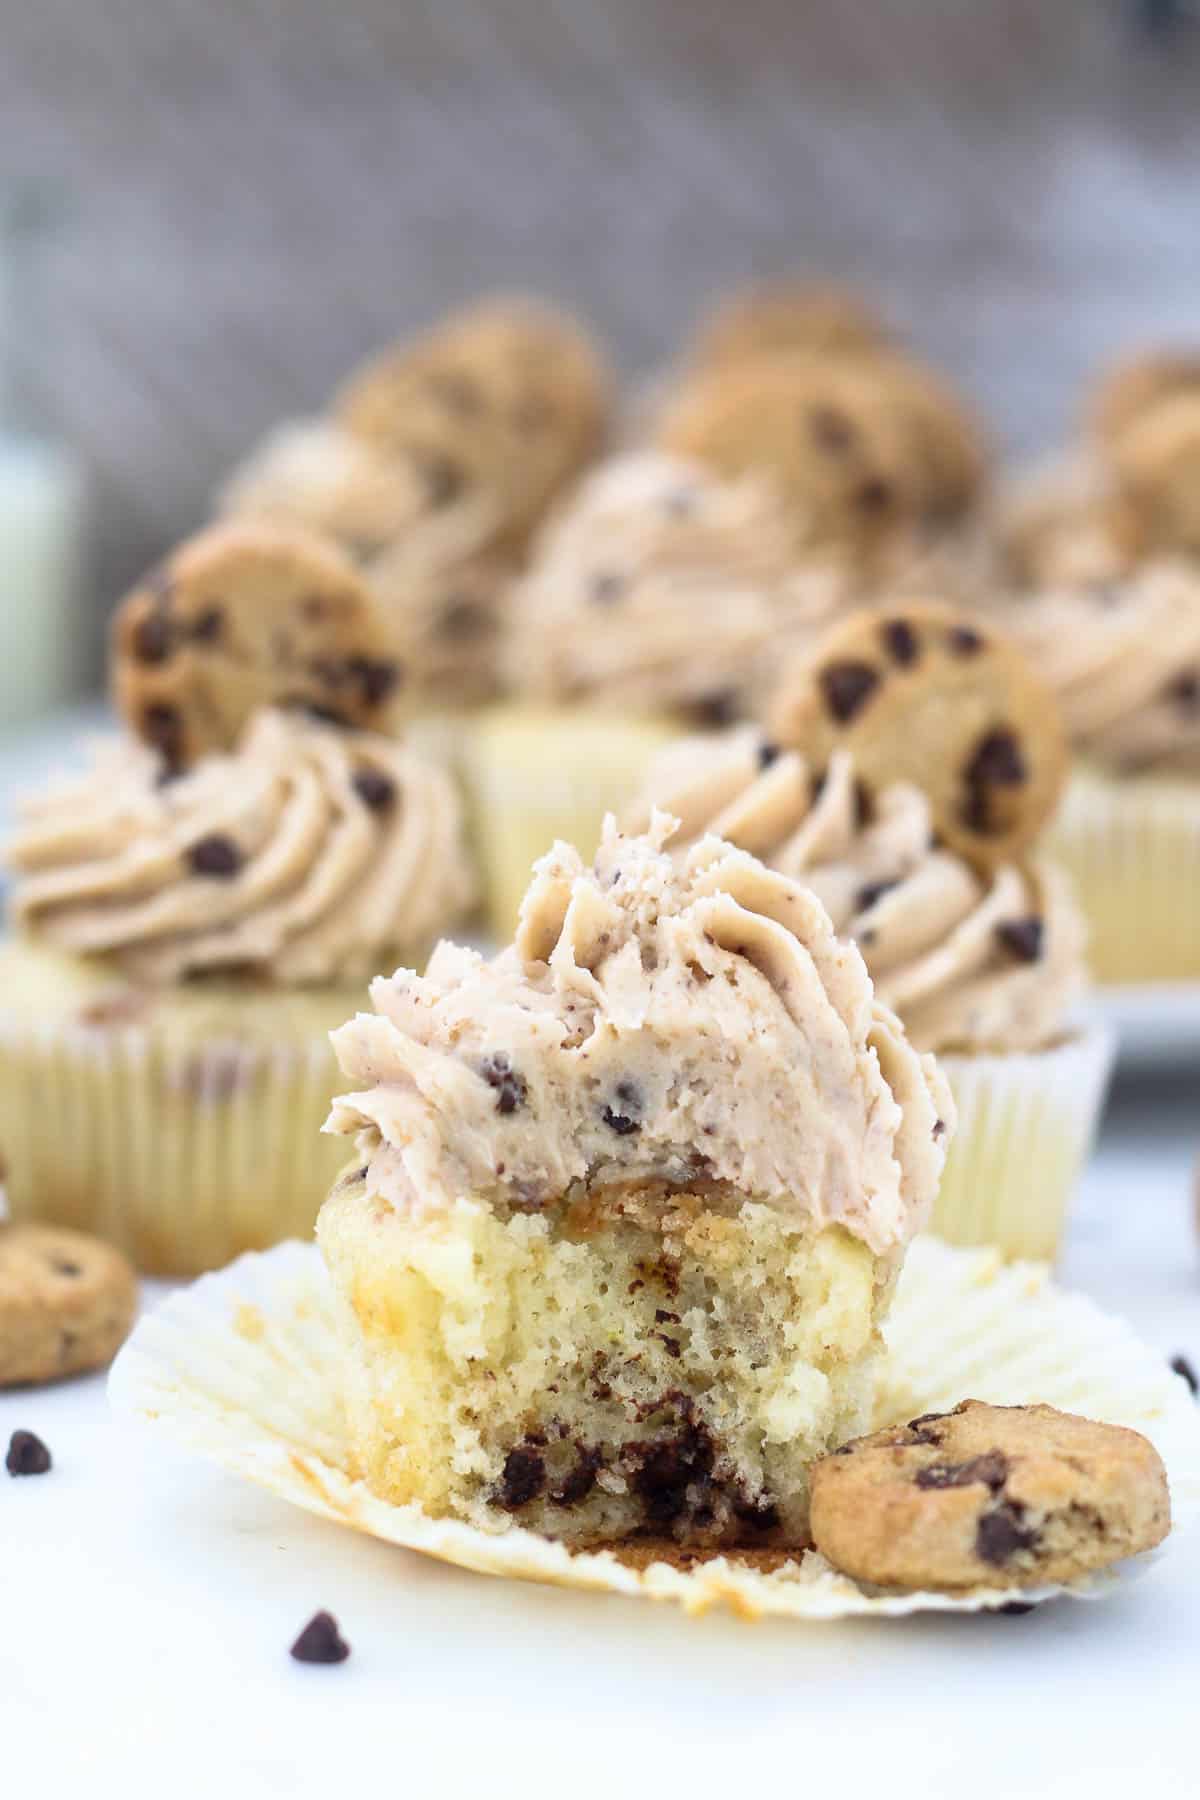 A chocolate chip cupcake with a bite missing to show the inside